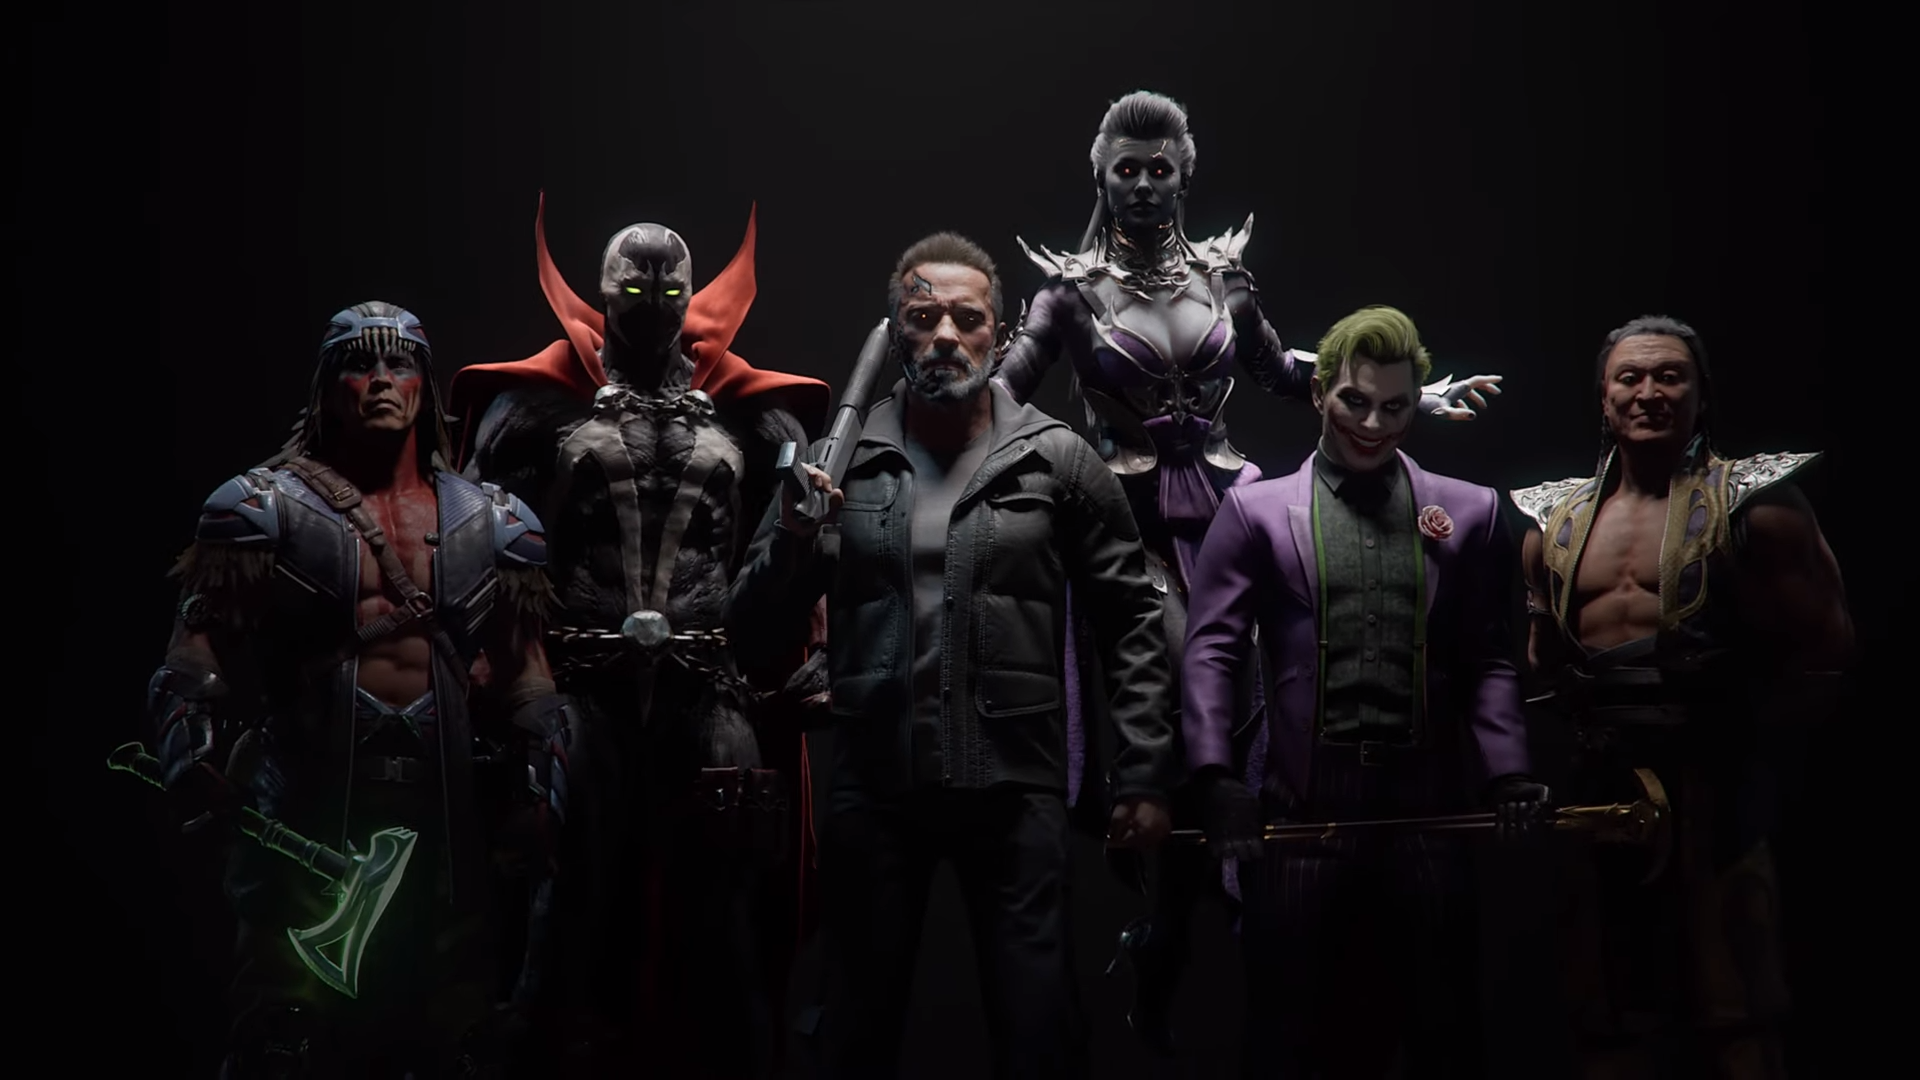 Mortal Kombat 11 Will Be Getting Joker and The Terminator as DLC Characters